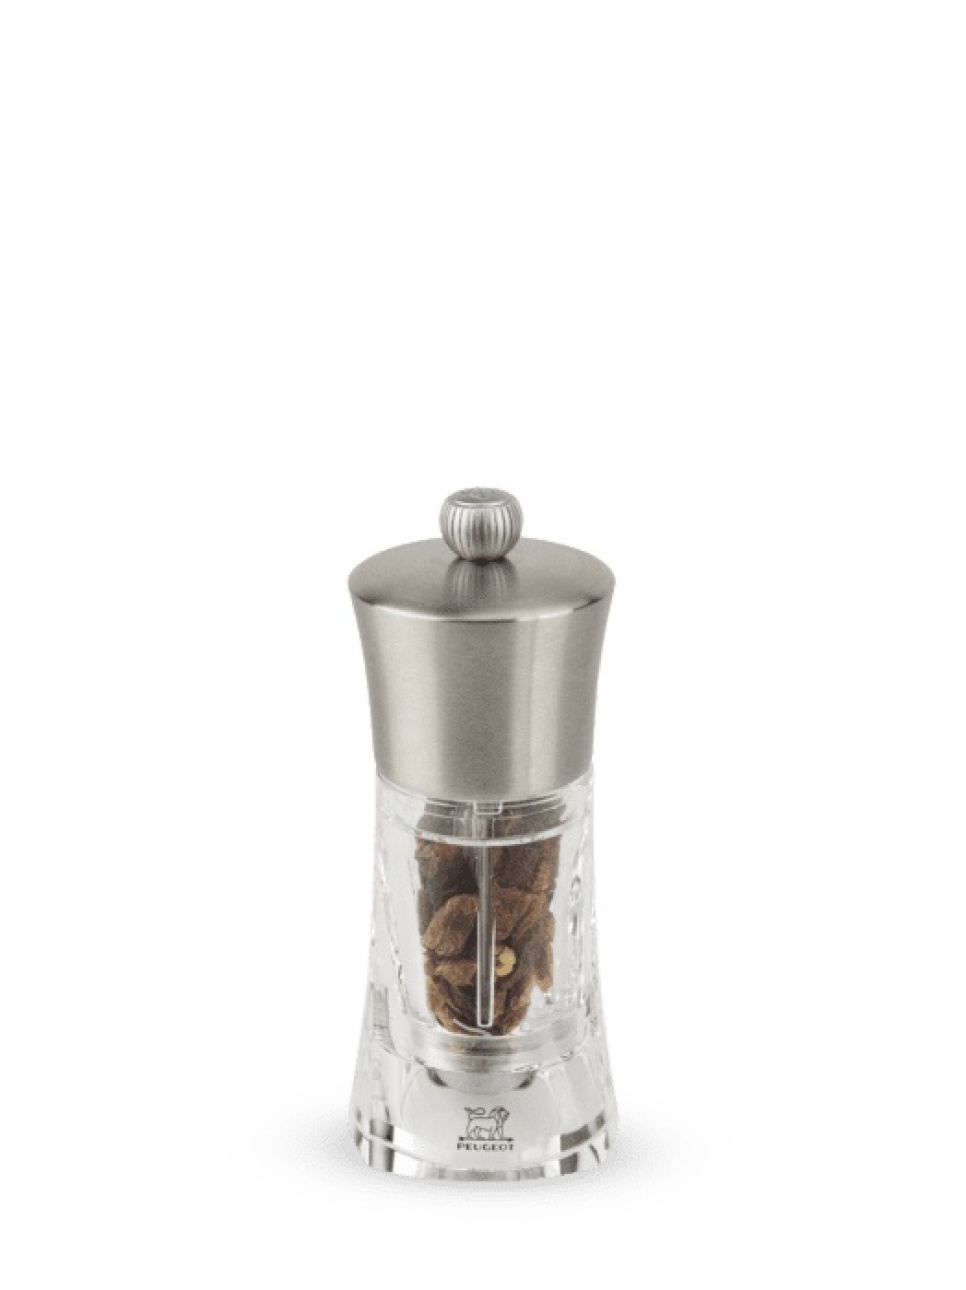 Ouessant Chili Grinder - Peugeot in the group Cooking / Kitchen utensils / Salt & pepper mills at KitchenLab (1090-19834)